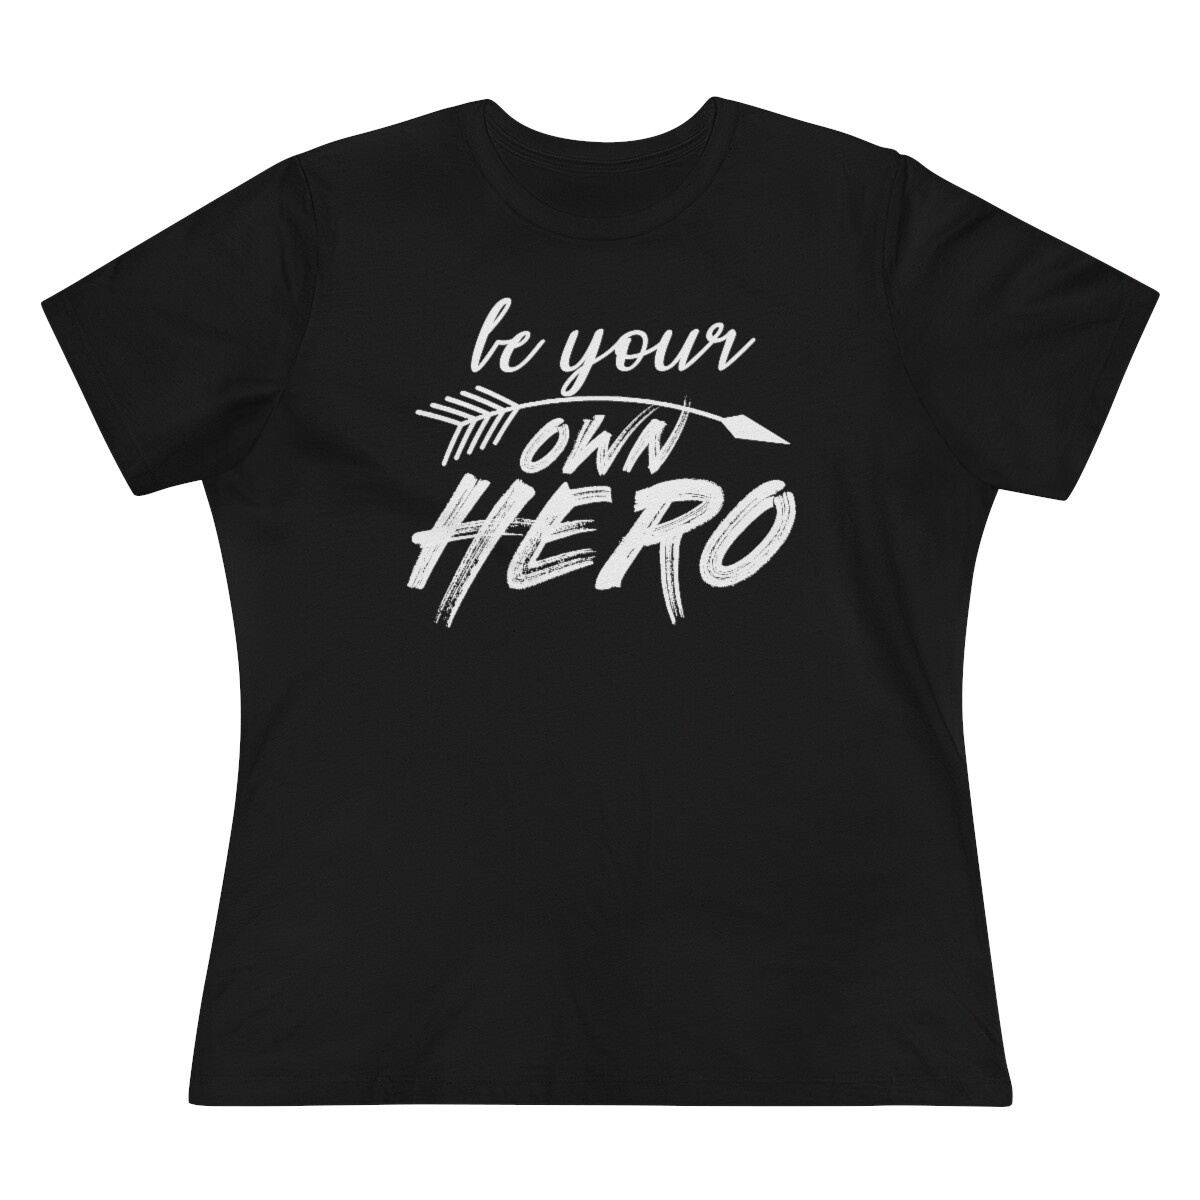 *Be Your Own Hero - 6400